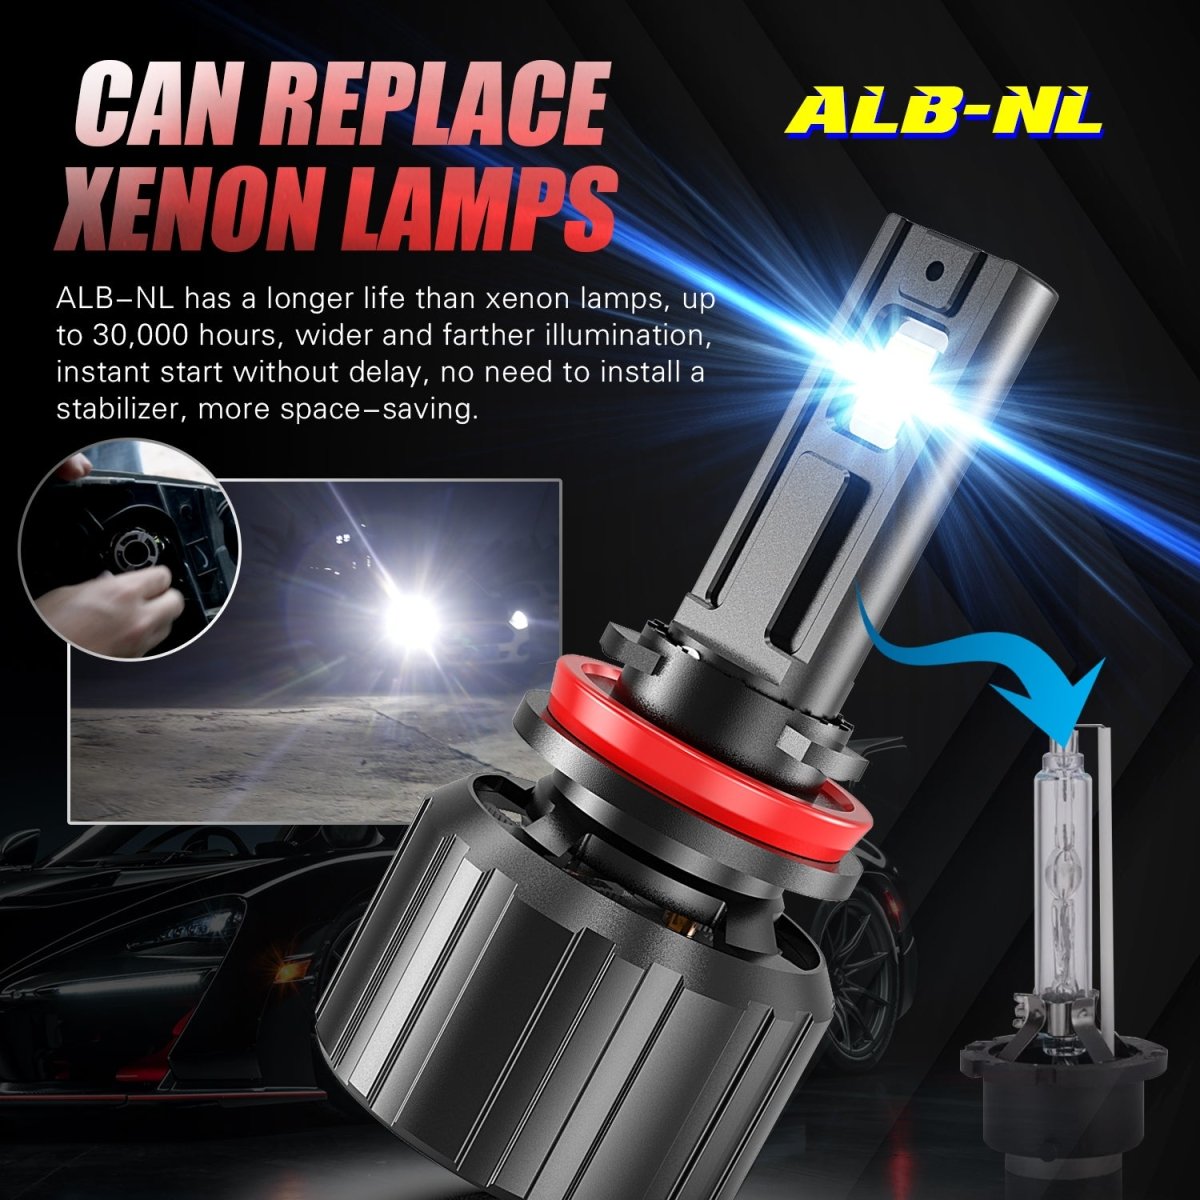 Ultra High-Power H7 LED Headlight Bulbs - Bluetooth Color Changing - GoRECON